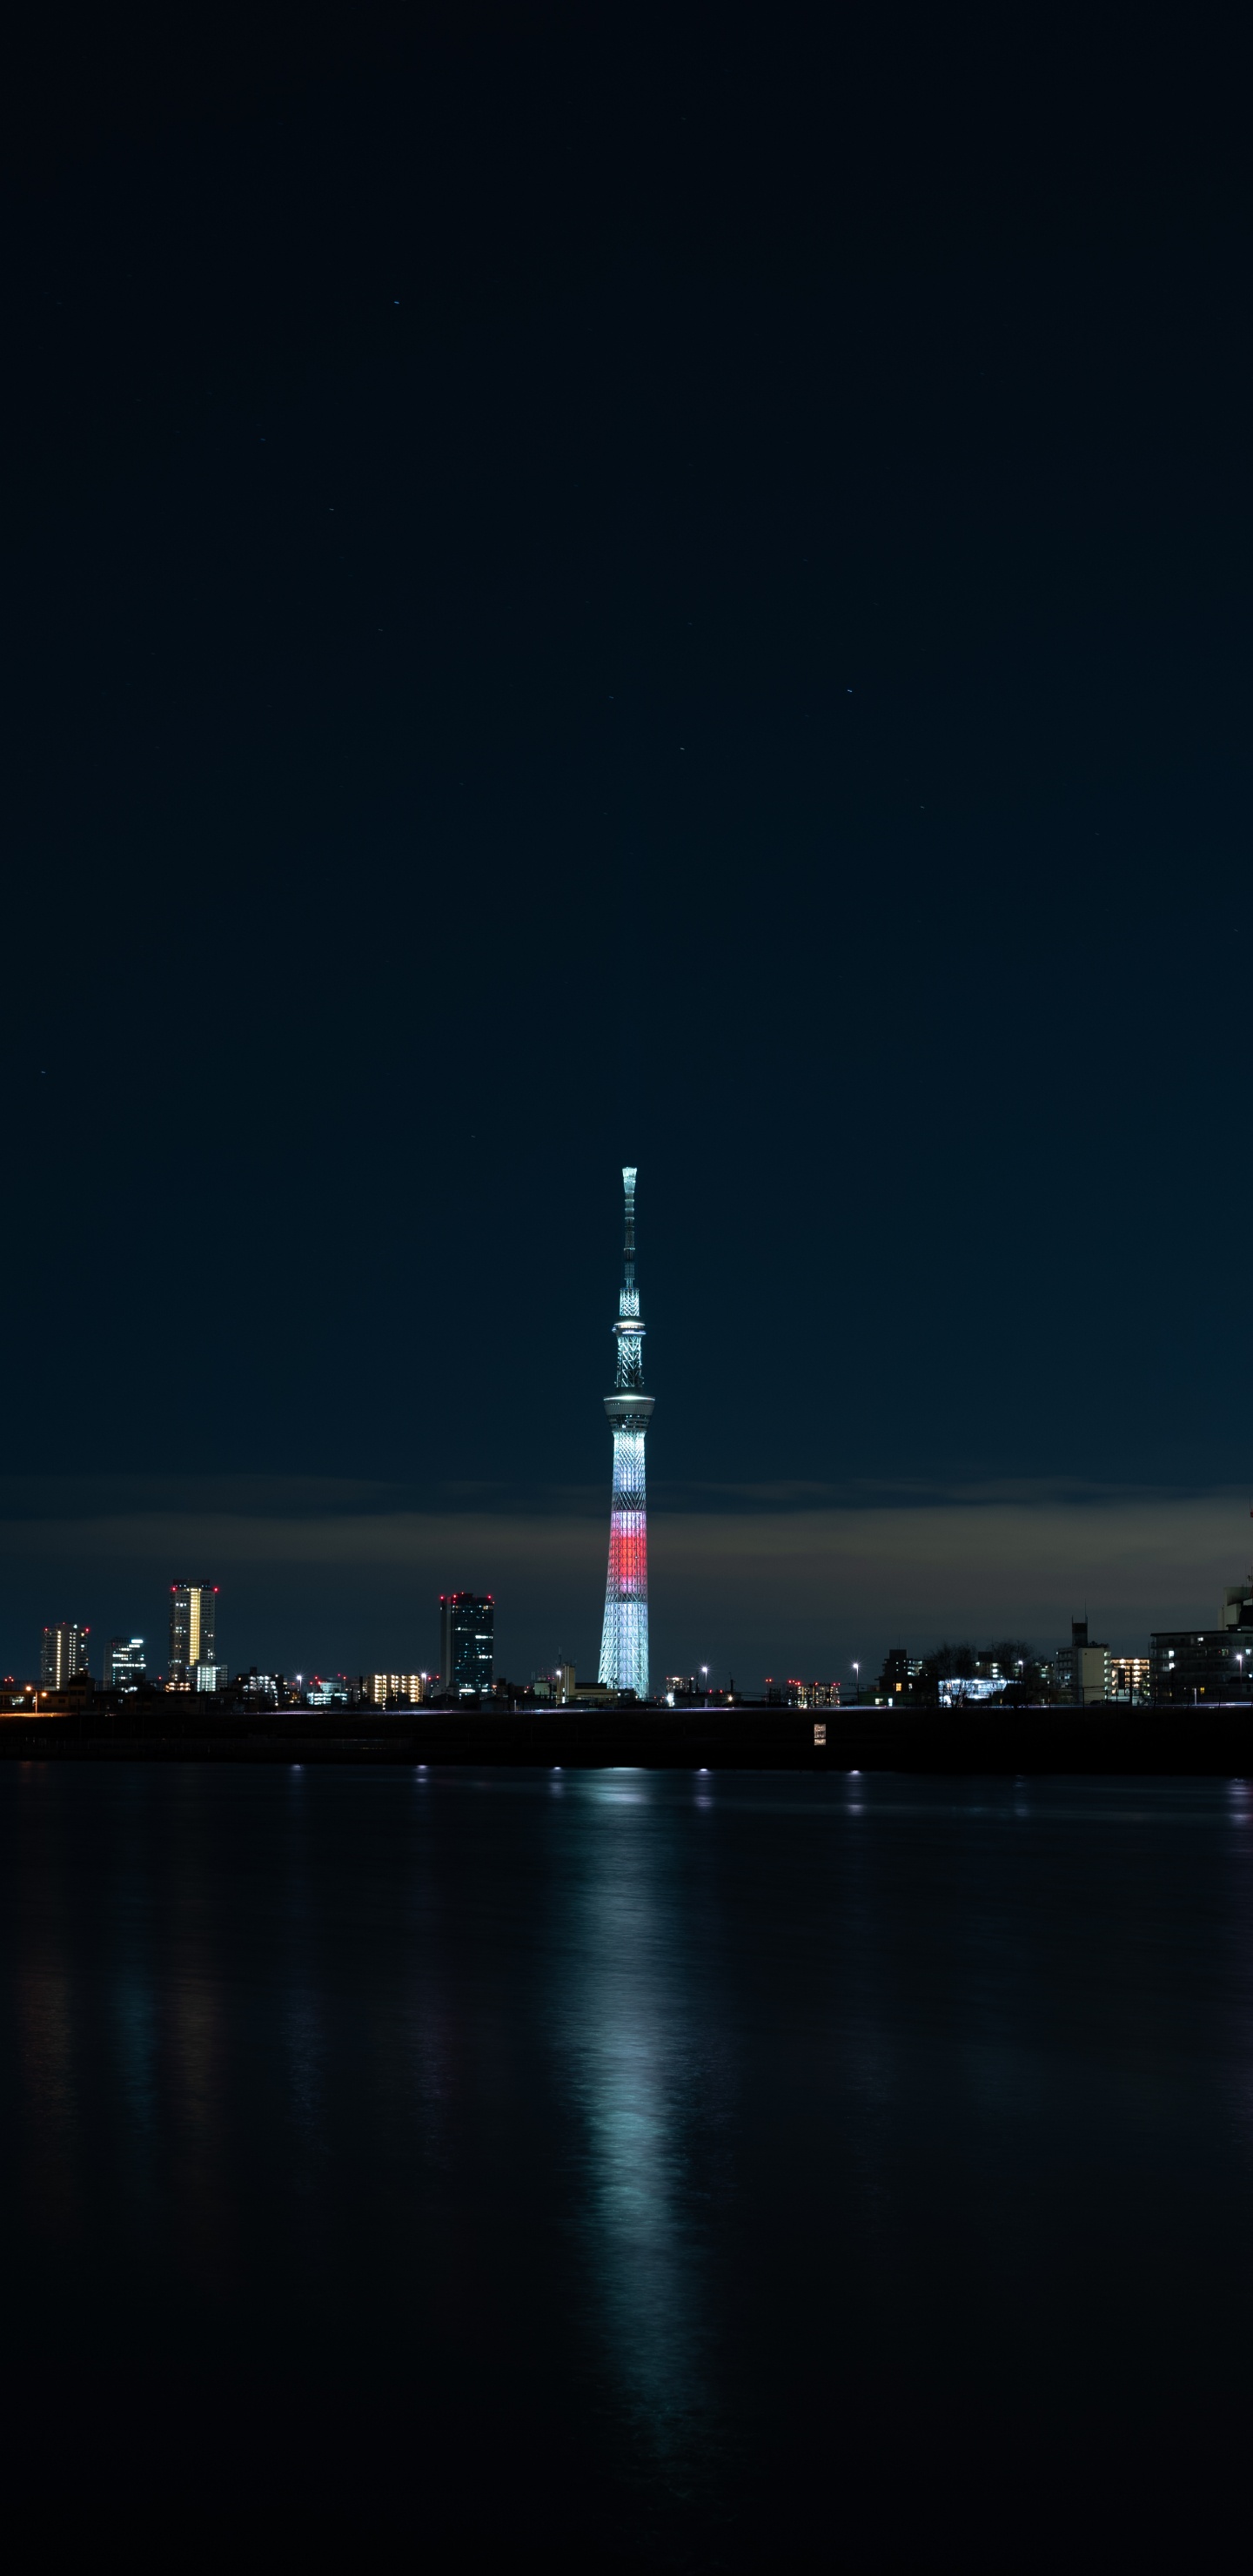 White and Red Tower Near Body of Water During Night Time. Wallpaper in 1440x2960 Resolution